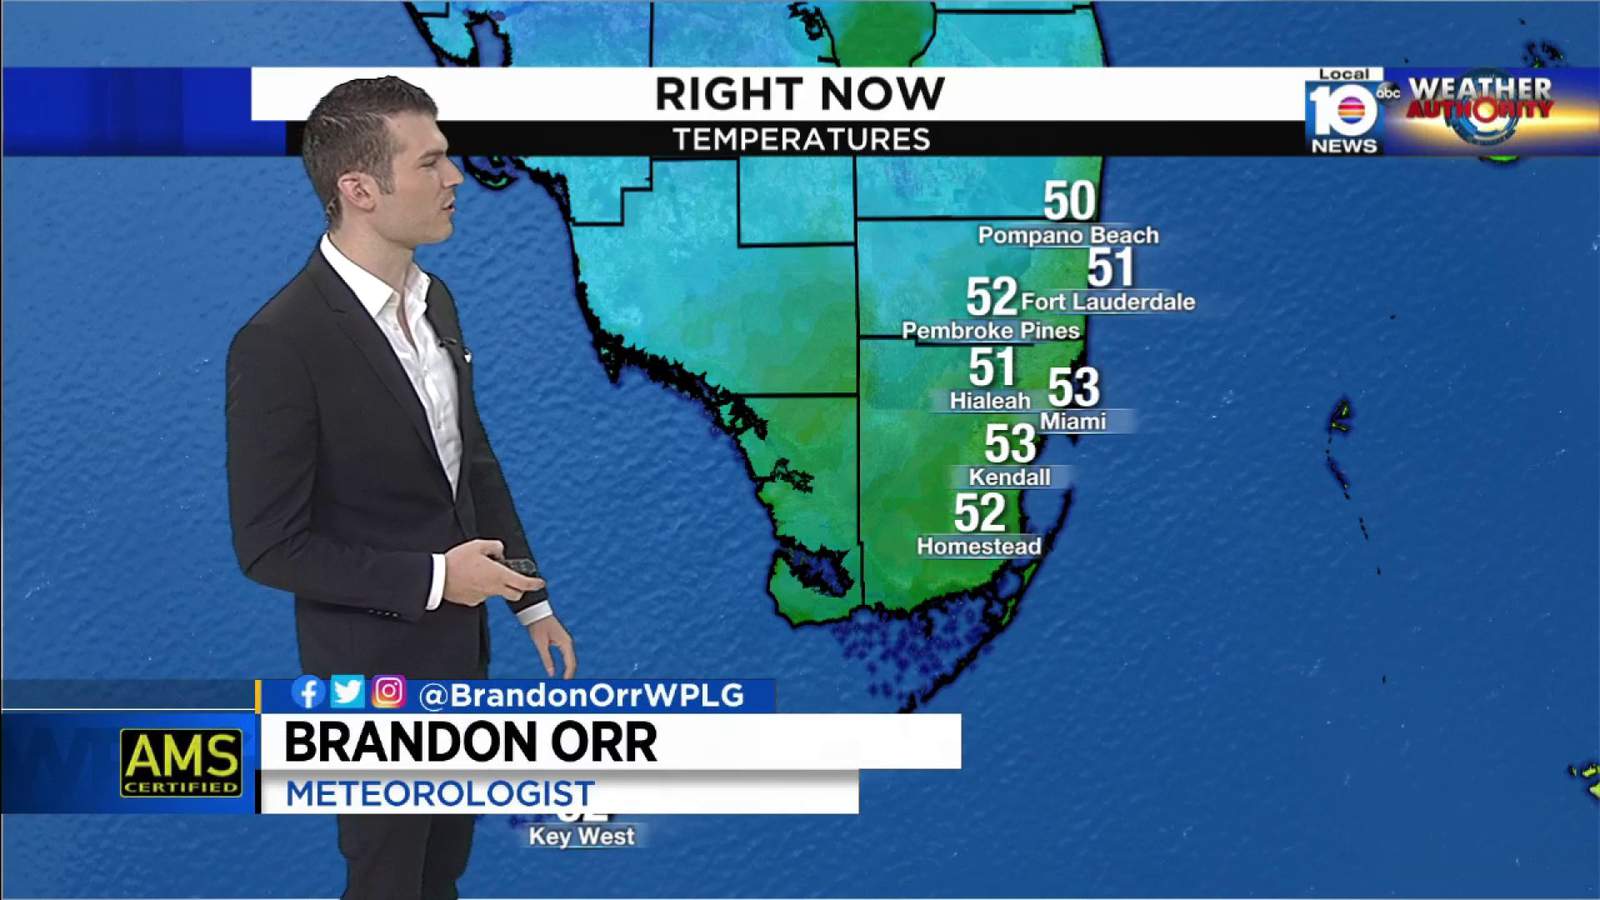 South Floridians wake up to frigid Wednesday morning